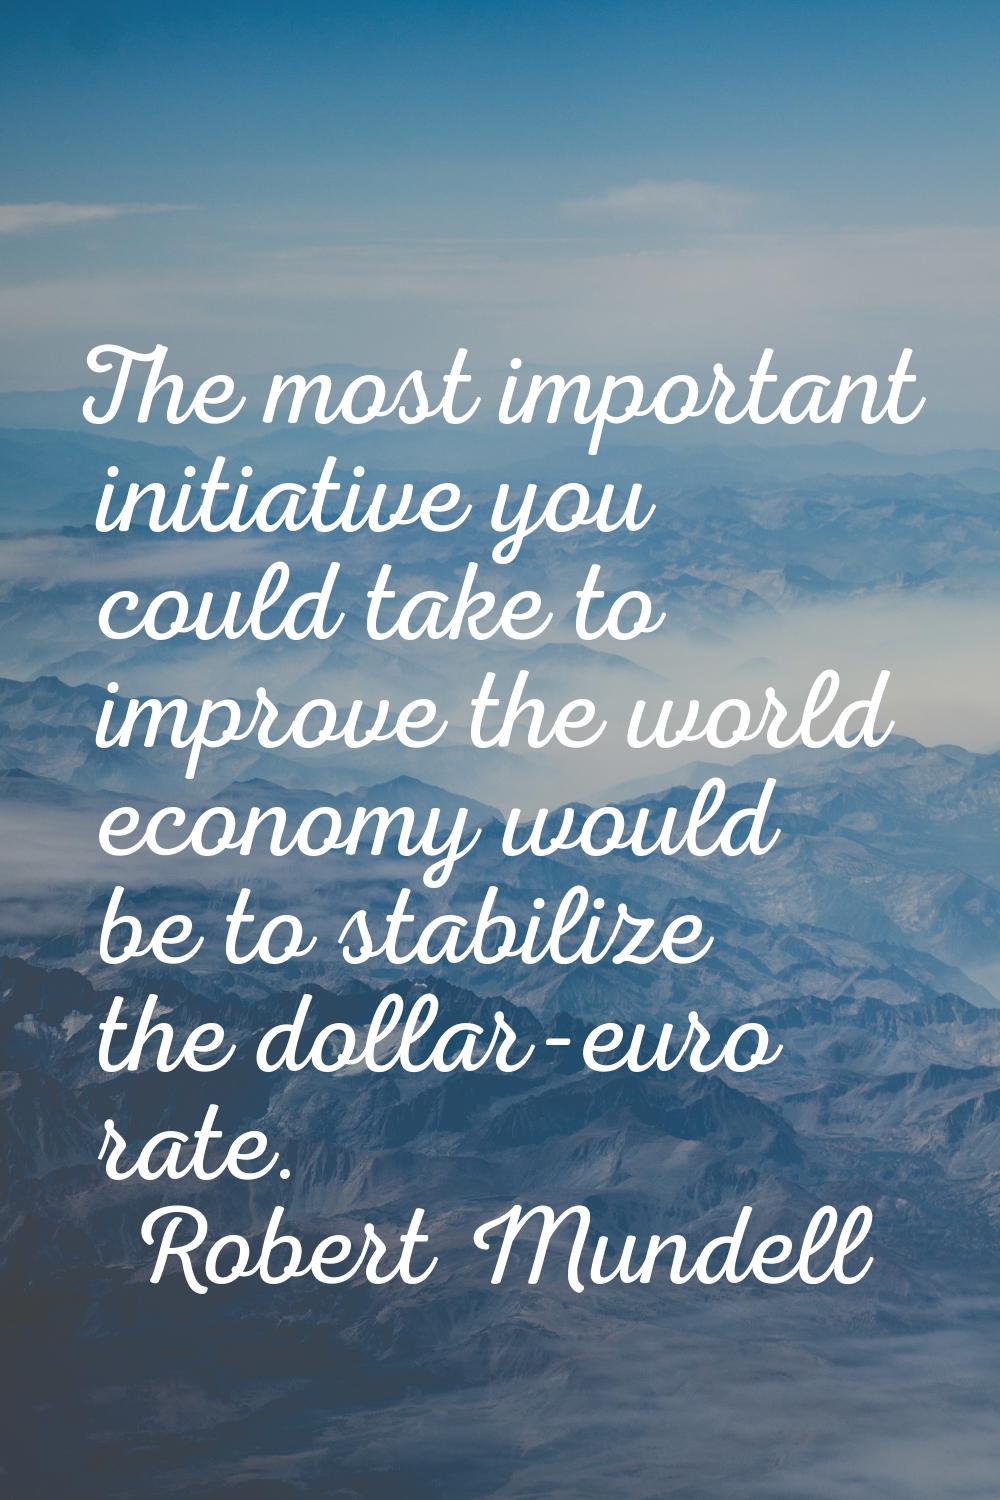 The most important initiative you could take to improve the world economy would be to stabilize the